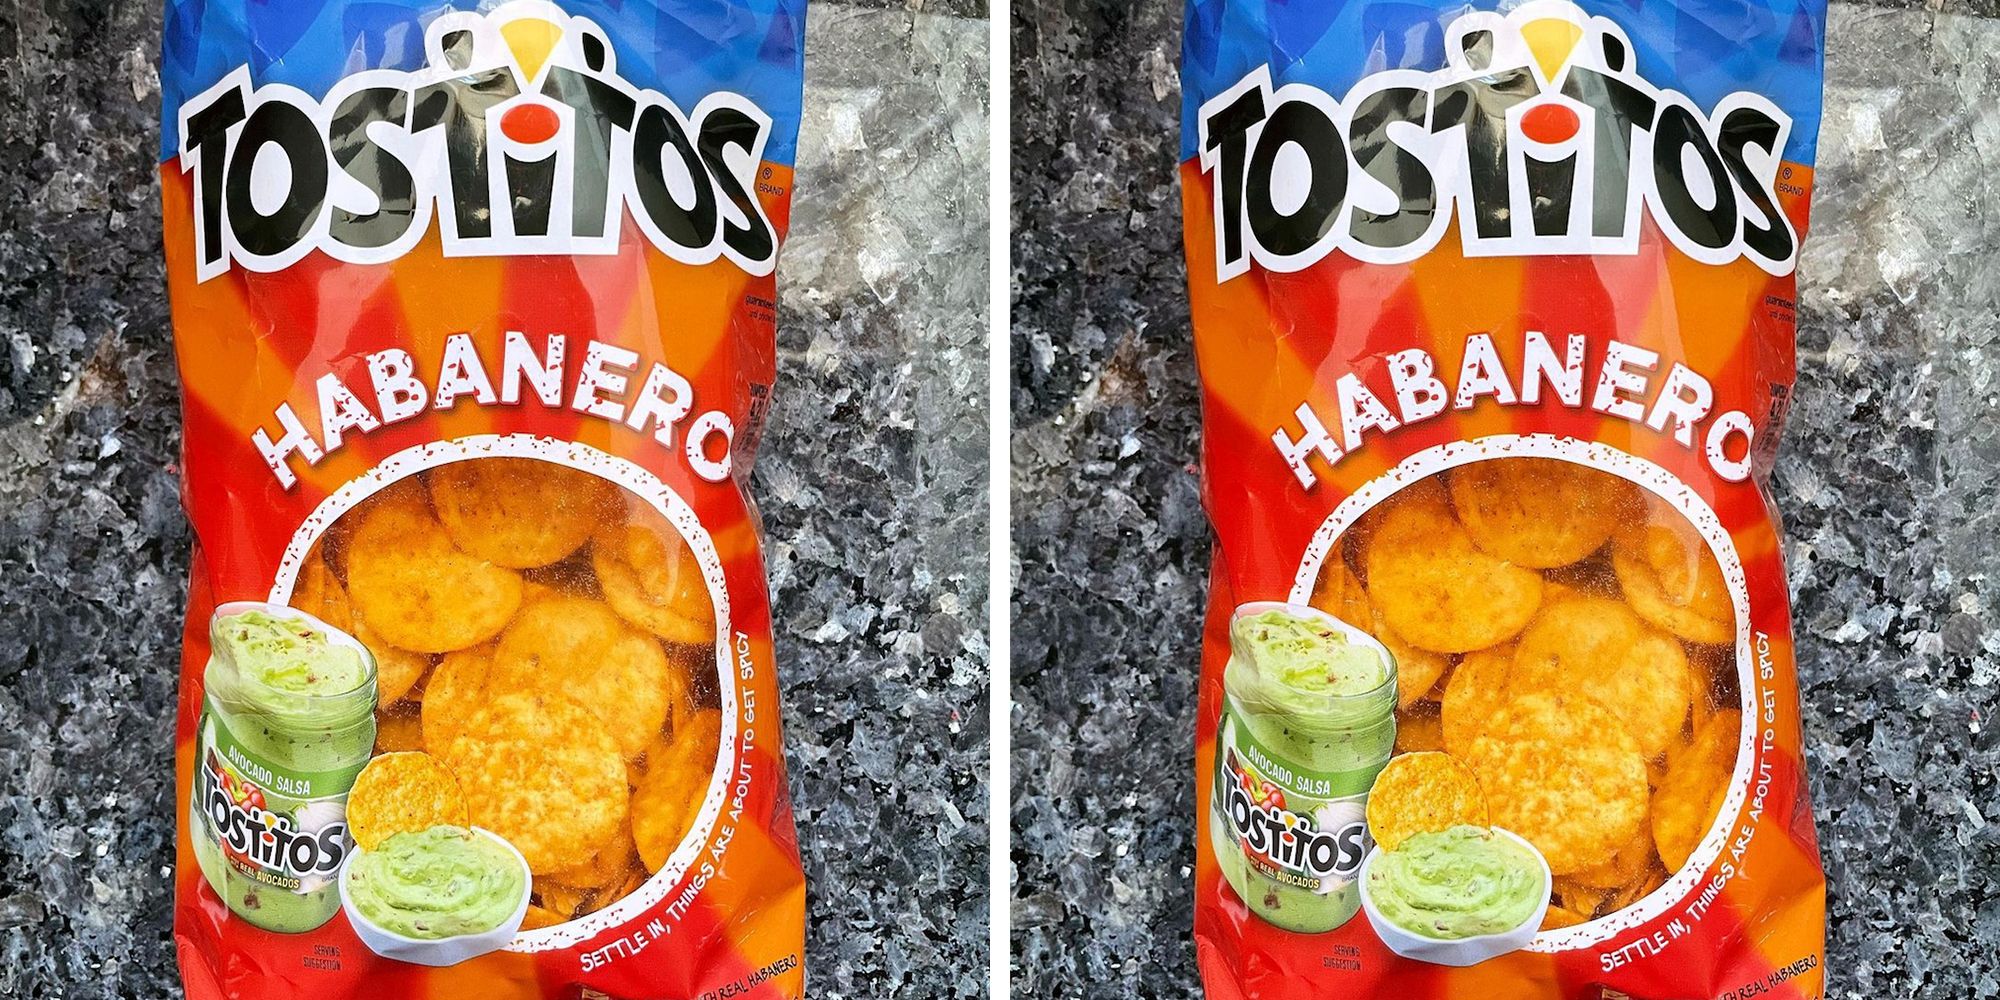 The New Tostitos Habanero Flavor Adds Heat to Your Chip-and-Dip Experience